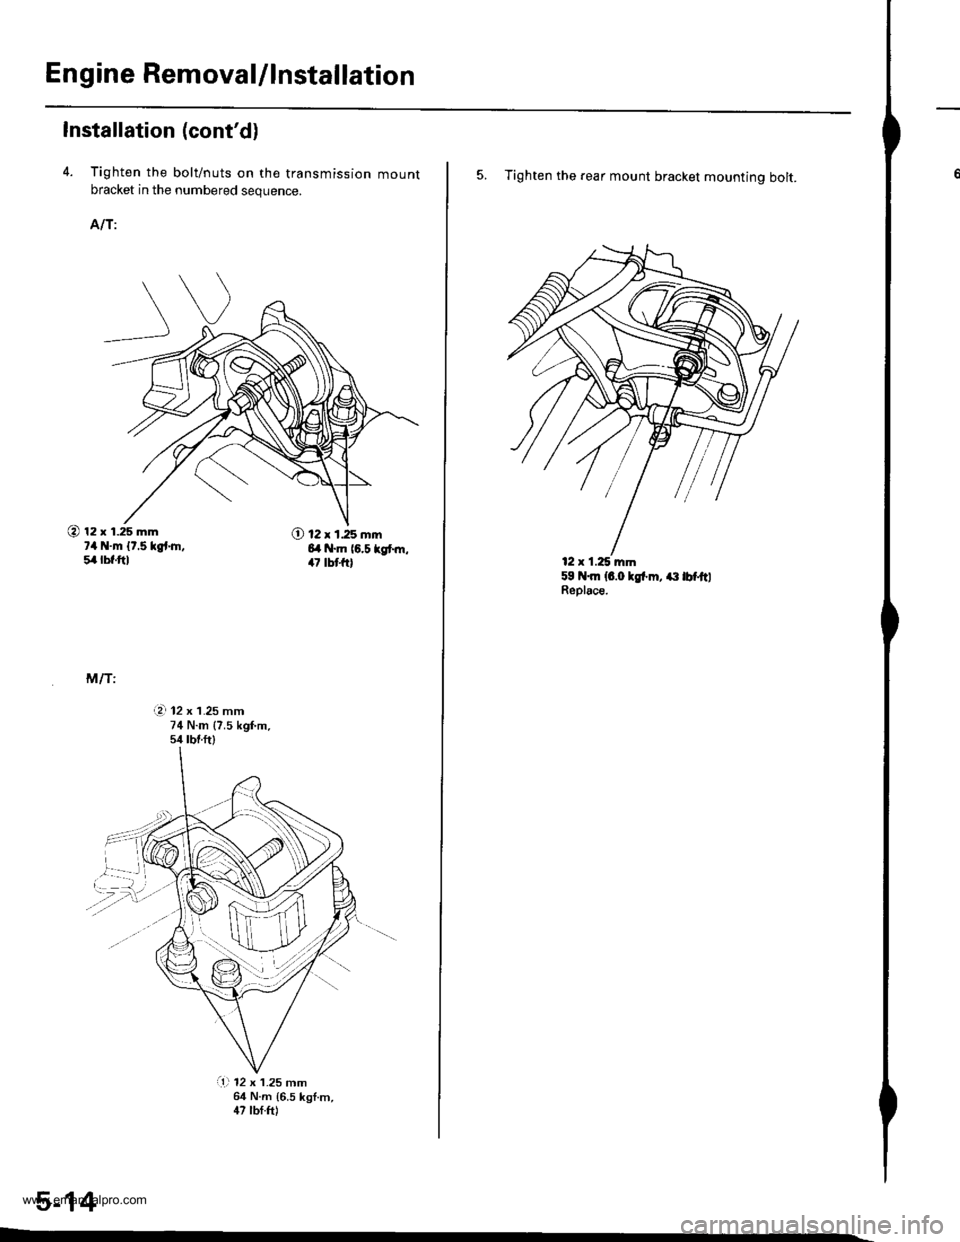 HONDA CR-V 1999 RD1-RD3 / 1.G Owners Manual 
En gine RemovaUlnstallation
Installation (contd)
4. Tighten the bolt/nuts on the transmission mountbracket in the numbered sequence.
AIT:
@ 12 x 1.25 mm?4 N.m {t.5 kgt.h,5,4lbf.ftl
O 12 x 1.25 mm6l 